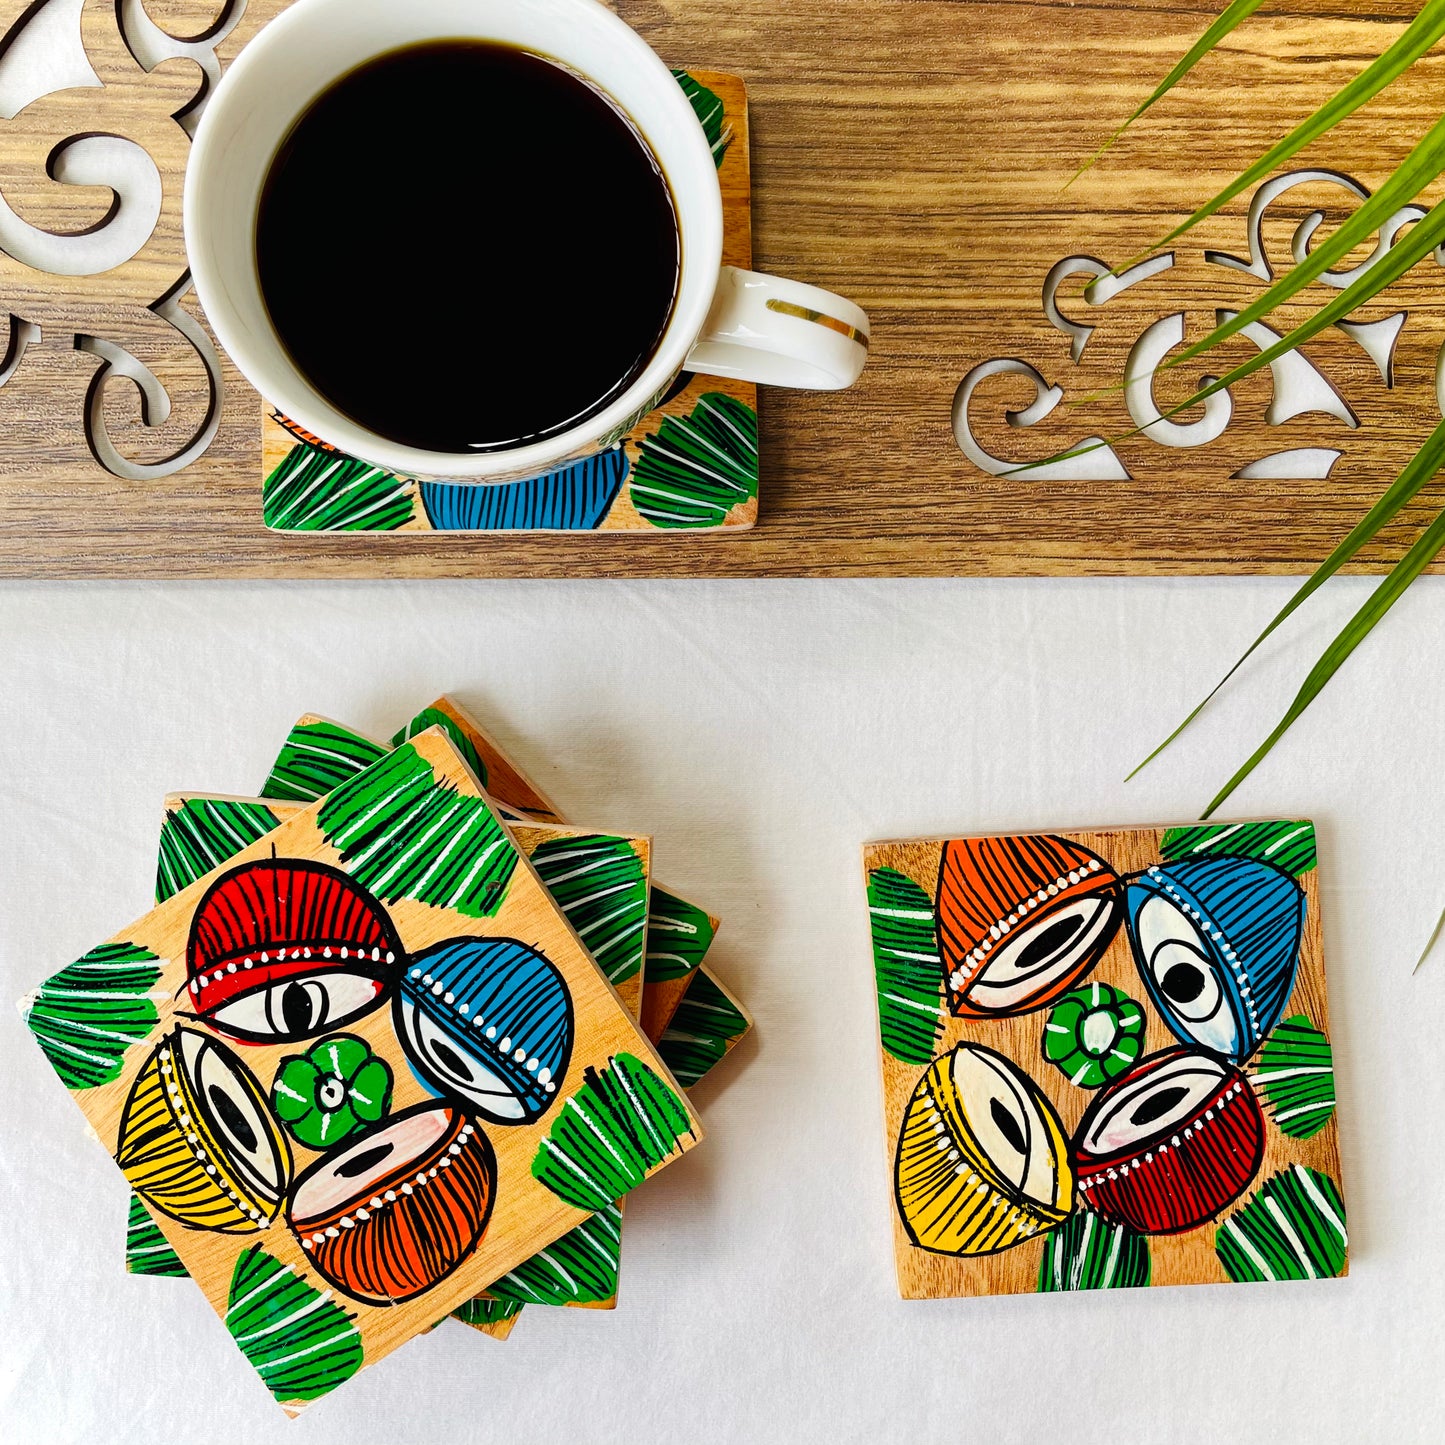 Five pure mango wood square wood coasters painted with four tablas, a type of Indian classical musical instrument in each wood coaster are placed near a teacup on a wood coaster filled with black tea with leaves in the background